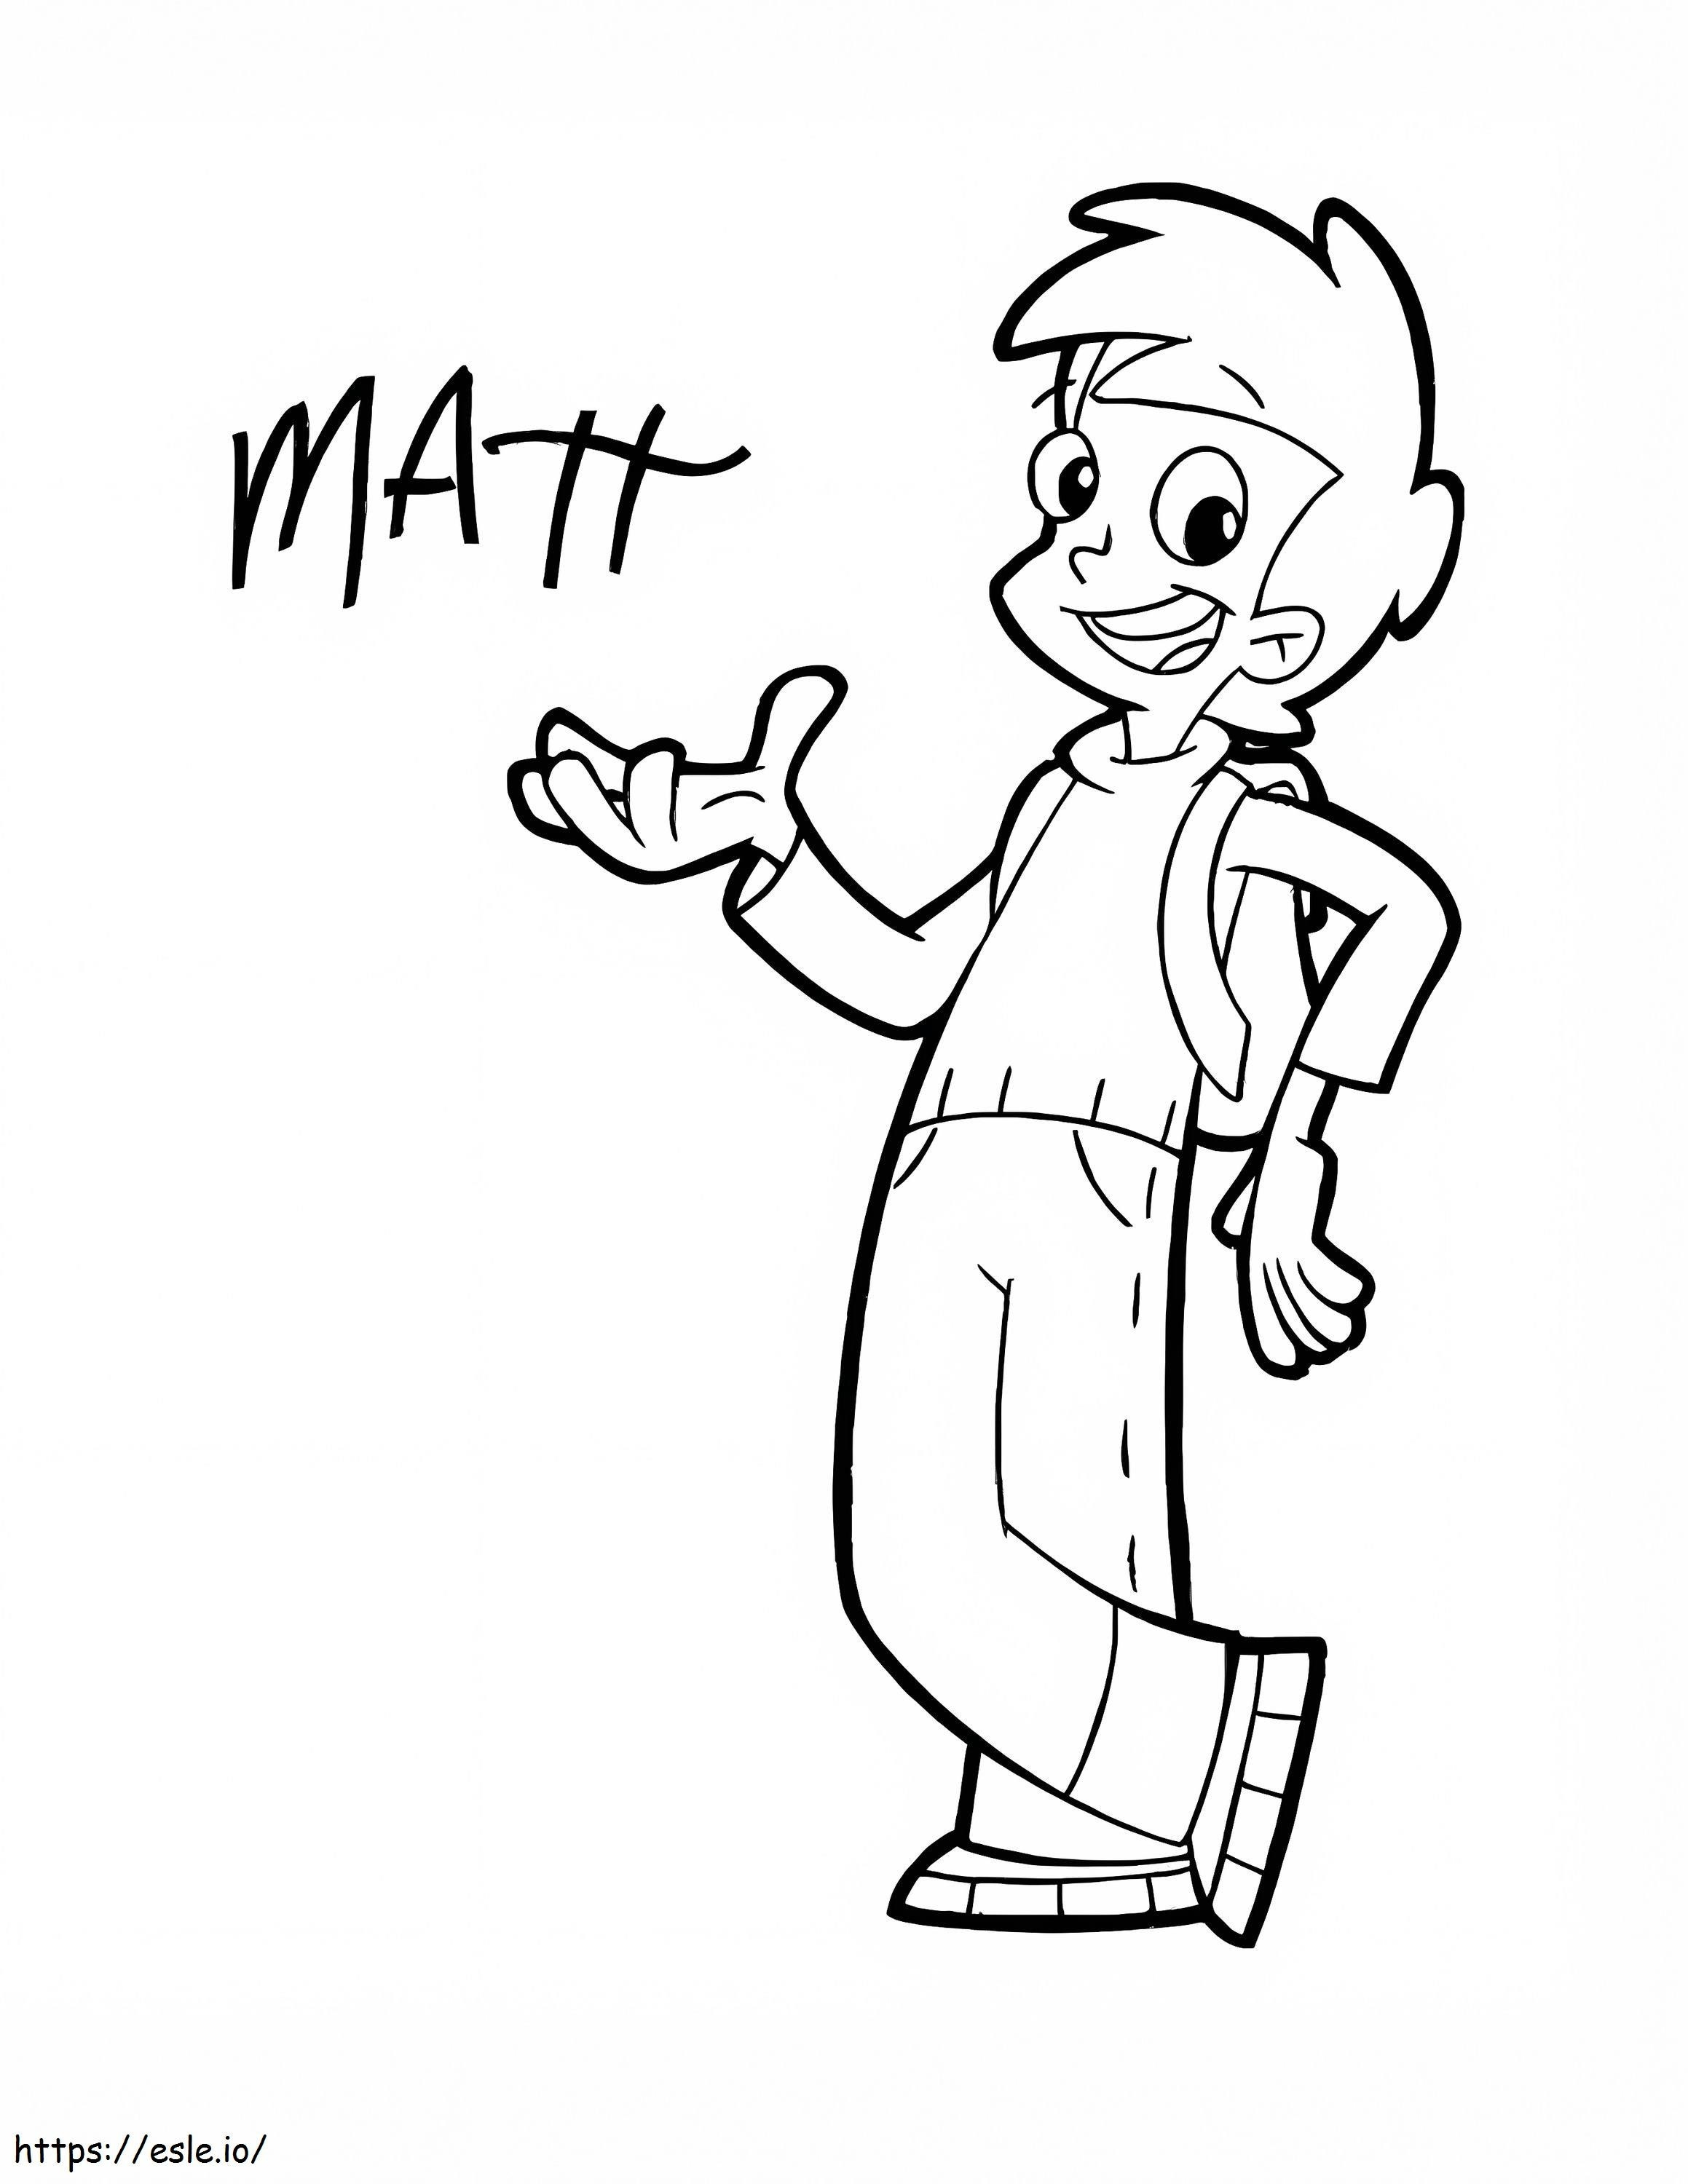 Matt The Cyberchase coloring page